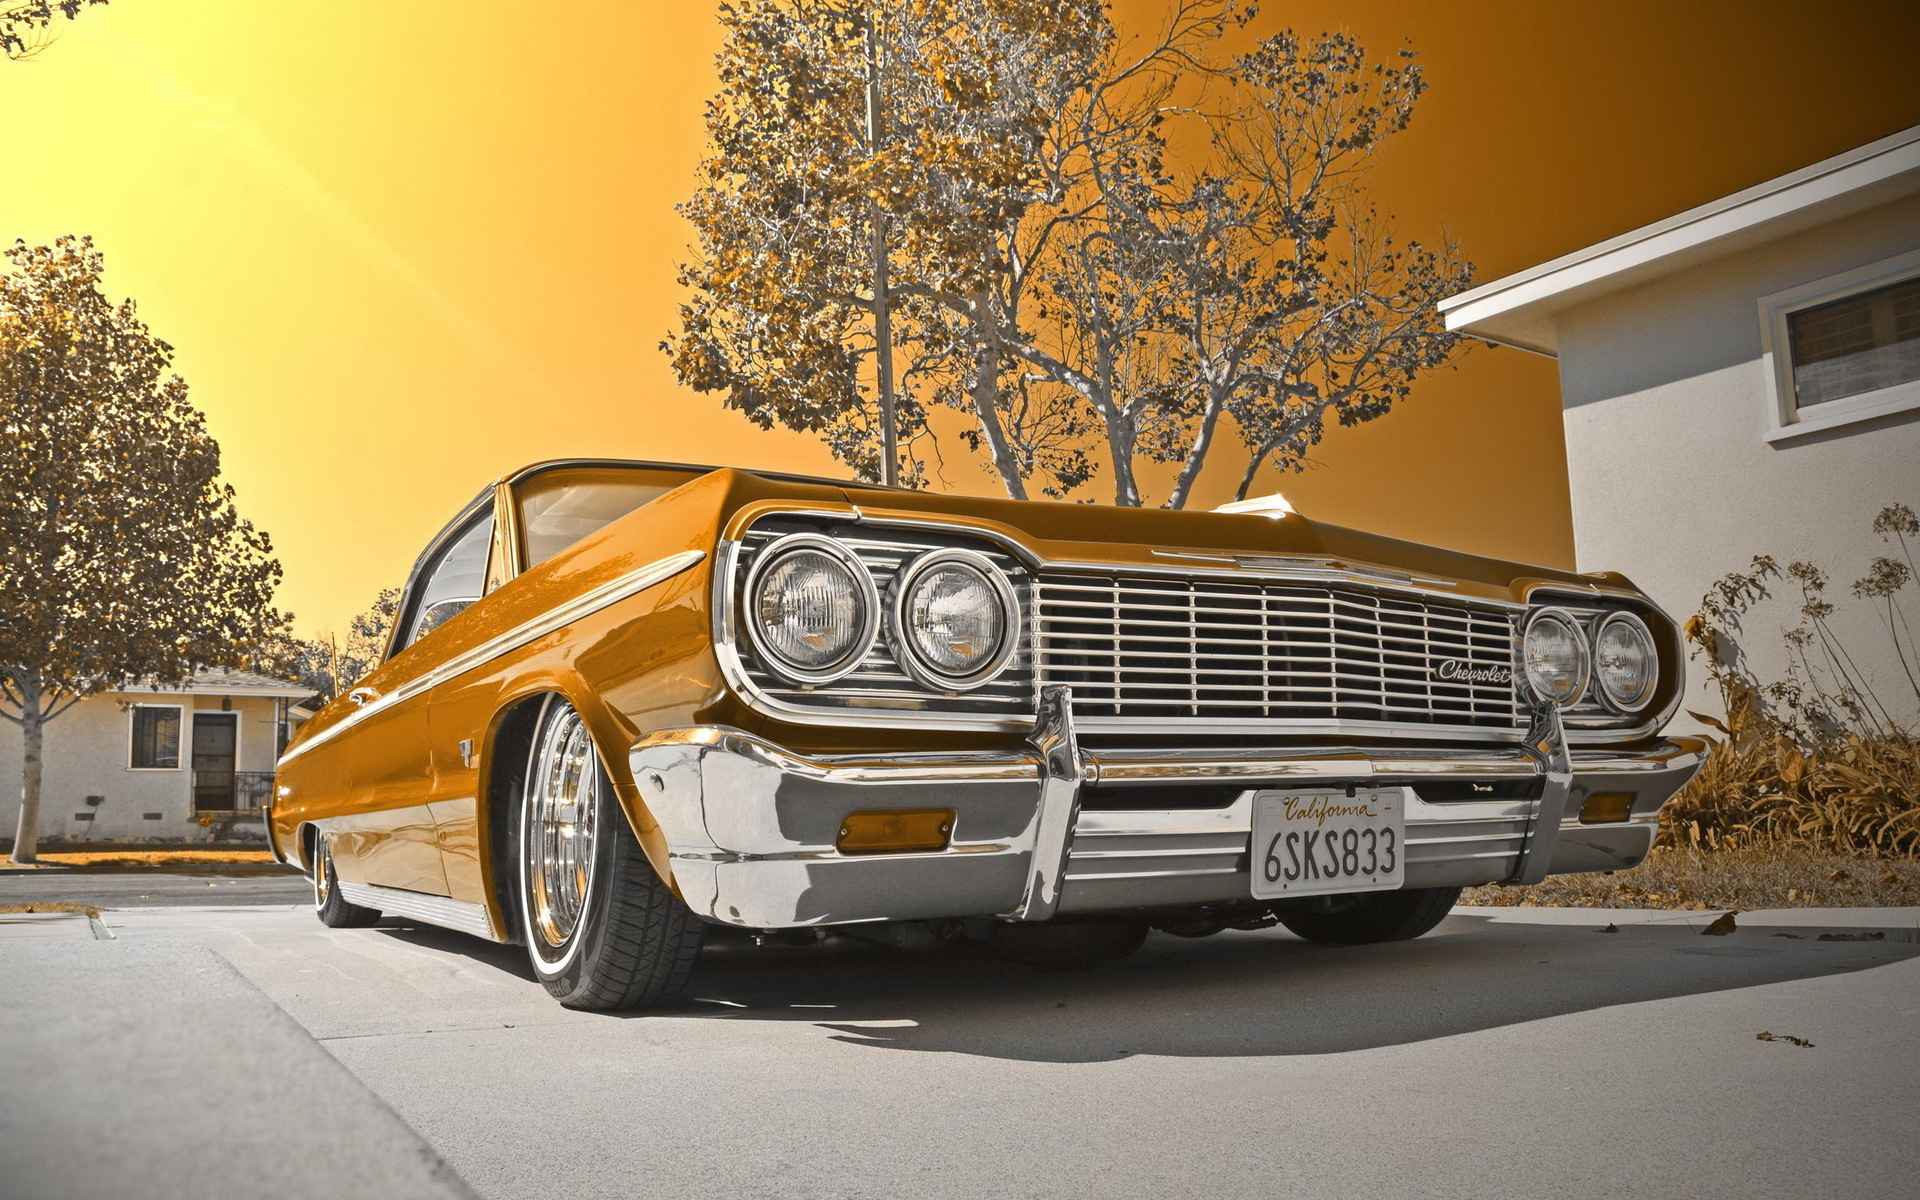 Supernatural Impala wallpaper by adil154  Download on ZEDGE  6d7b